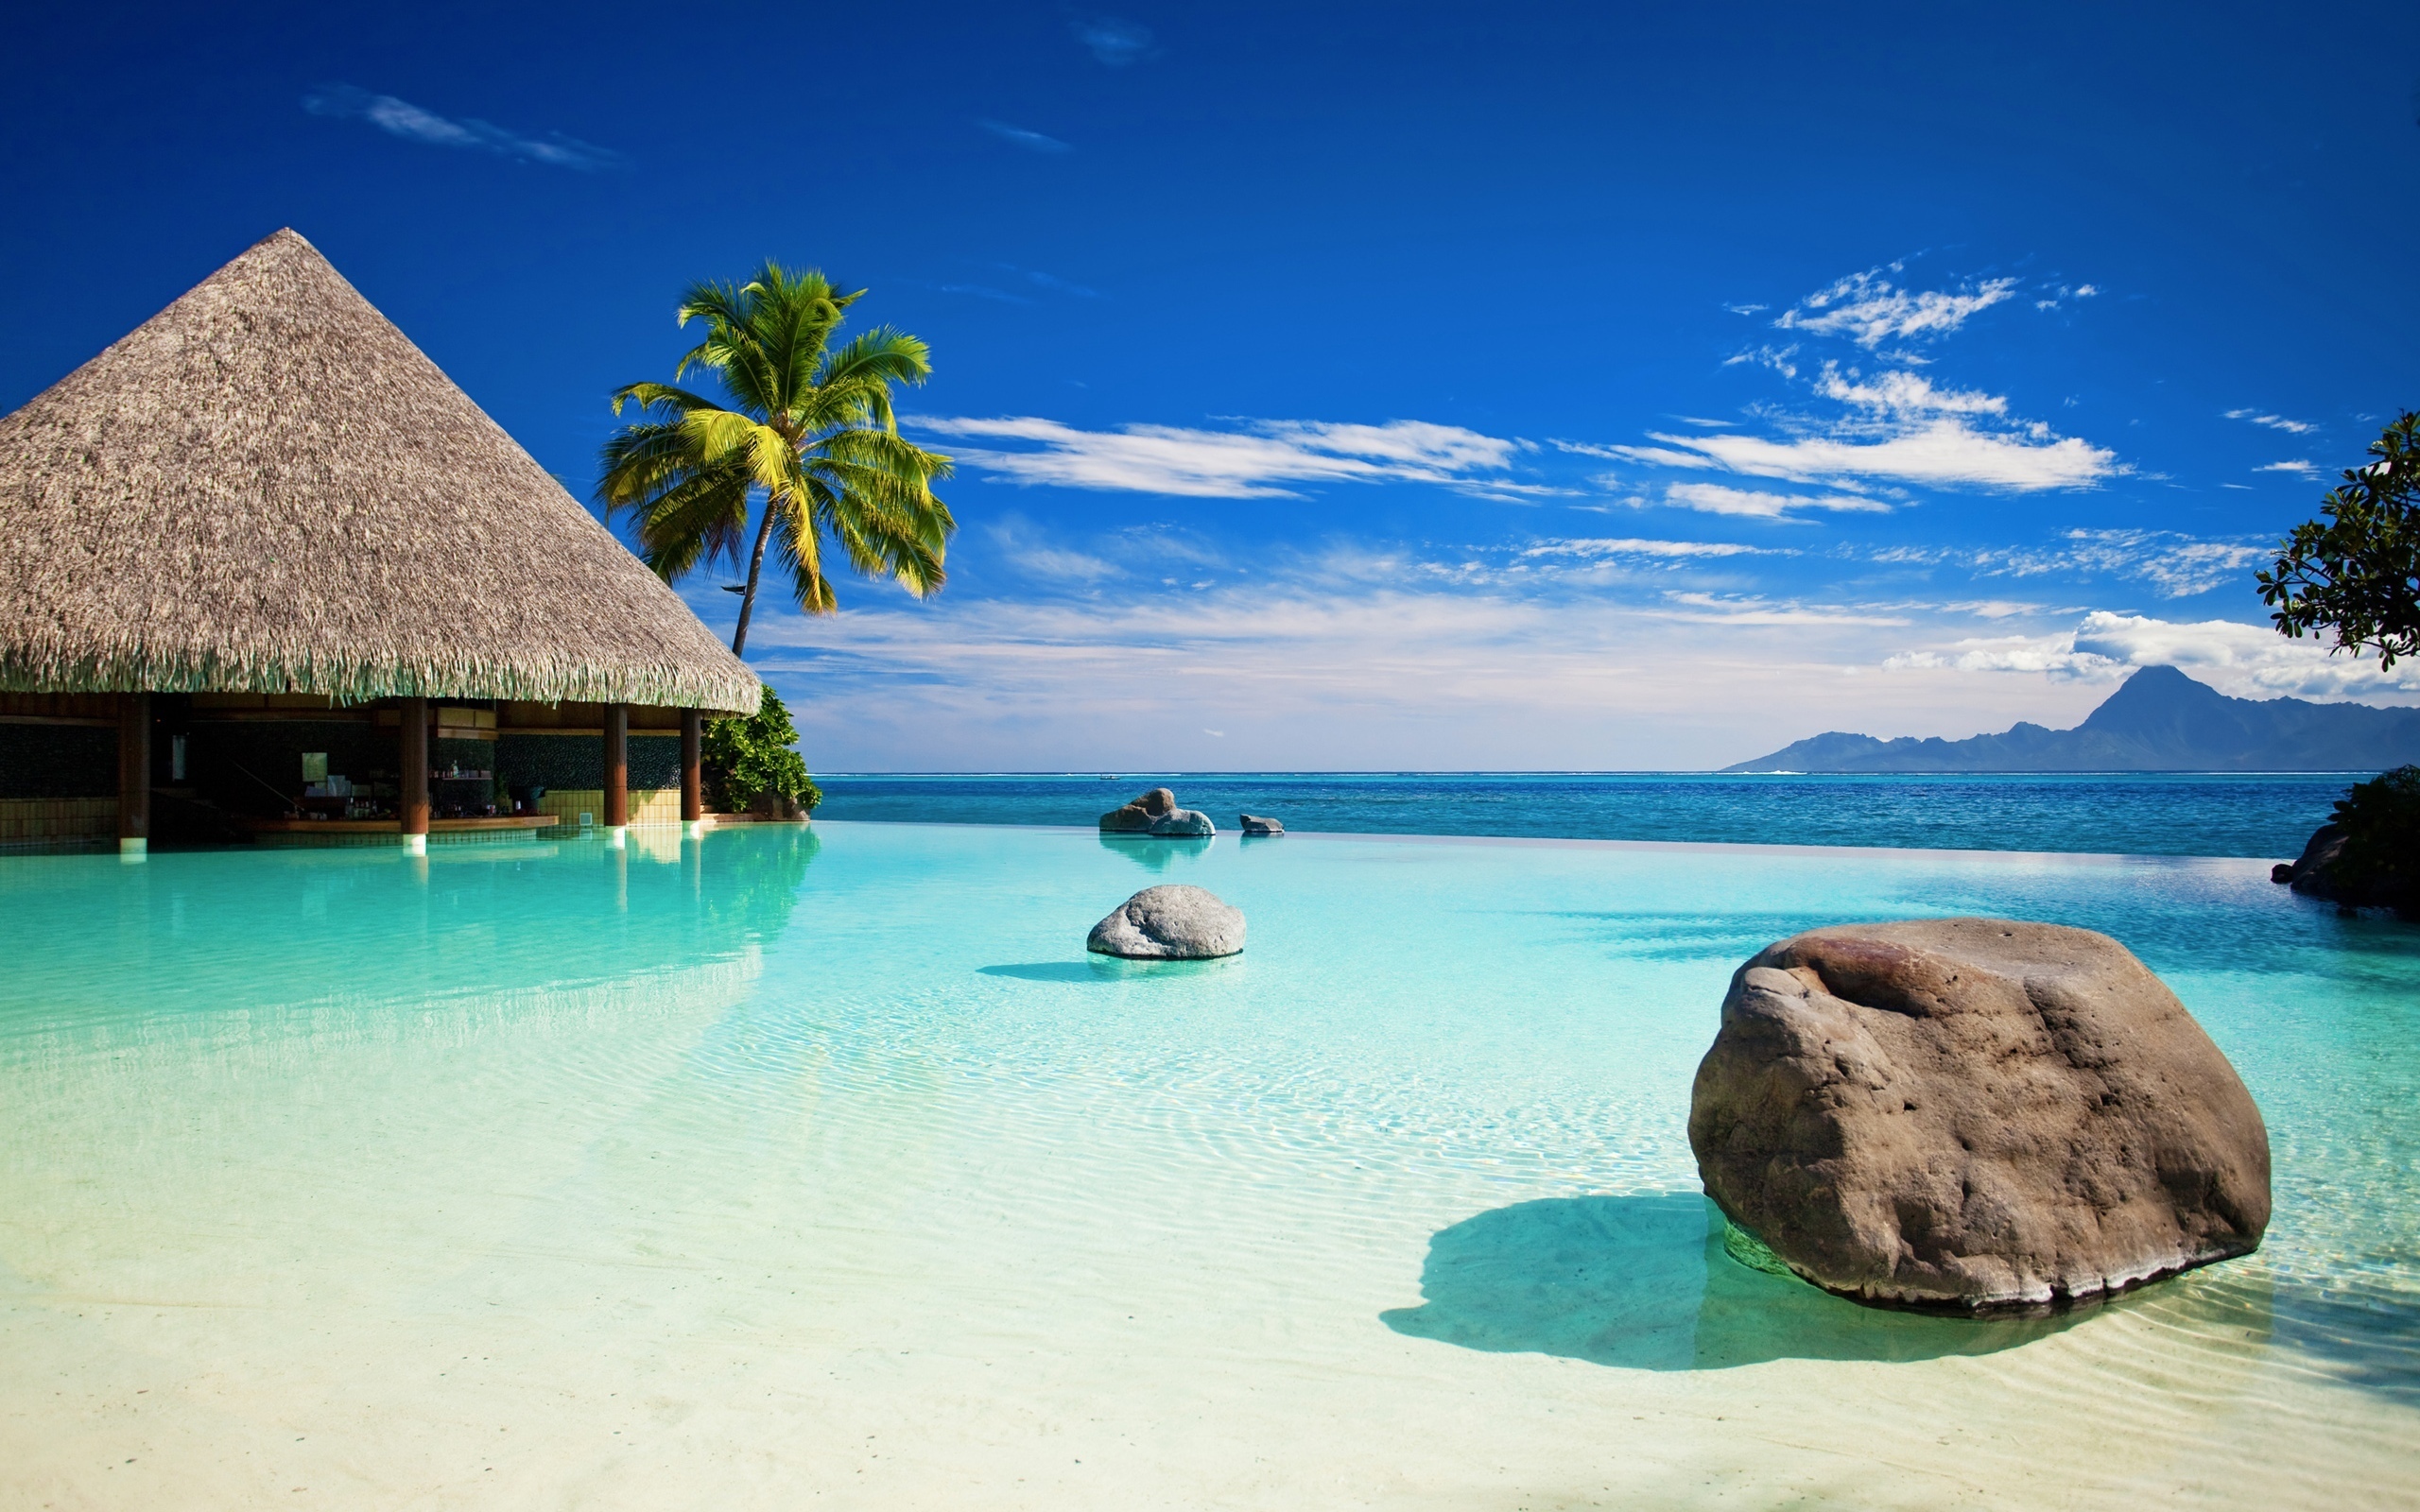 Photography Tropical HD Wallpaper | Background Image